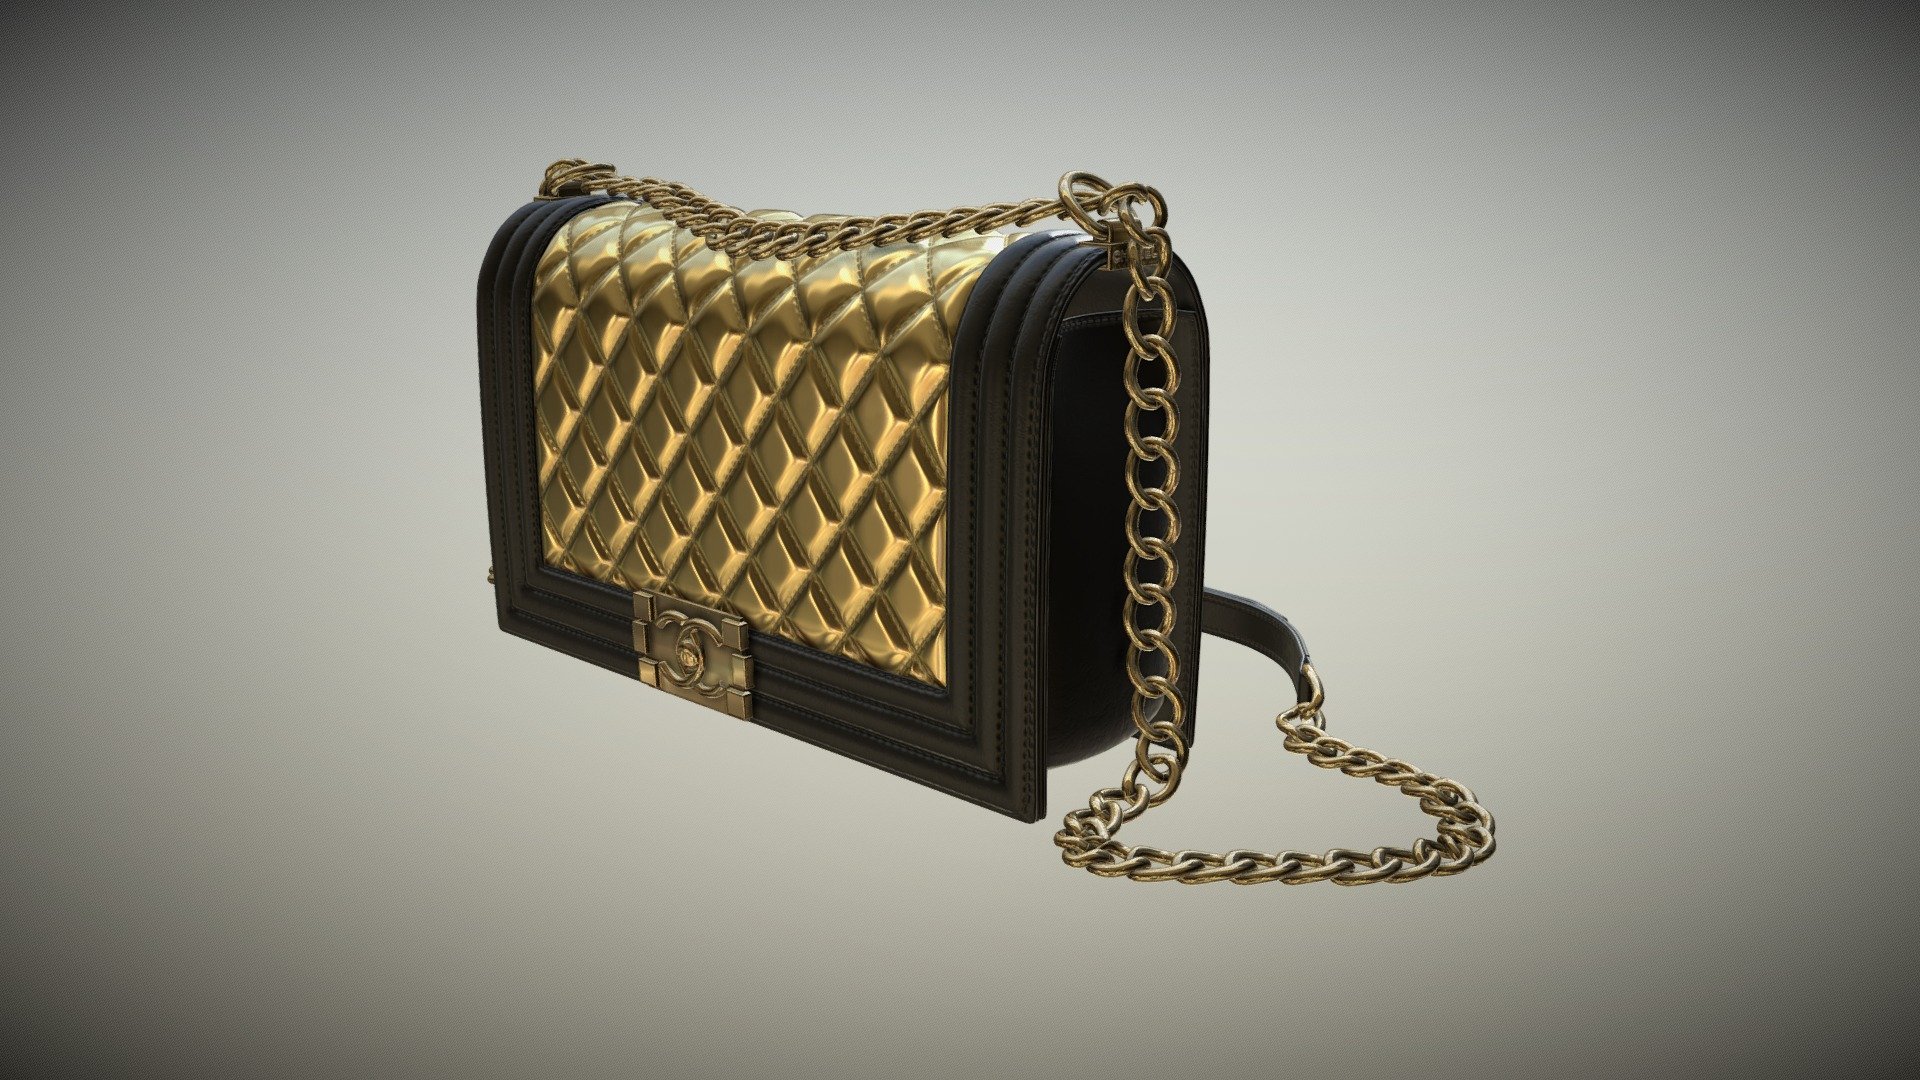 Very detailed and accurate model of Chanel's popular and luxury purse model.

It is has a medium polygon count, so it is a perfect middleground for both production and real-time projects, where realism and high detail level is required.

It has all textures needed for any software/render engine you use:
Diffuse, Glossiness, Normal, Height, IOR, Reflection, Specular, Roughness..

Very easy to work with, since all model elements are unwrapped in a single clean UV and the whole appearance is defined only with textures.

Mesh is clean and tidy, each element ready for further subdivision.

If you need low poly or printable version of it, feel free to contact me.

Enjoy the model 3d model